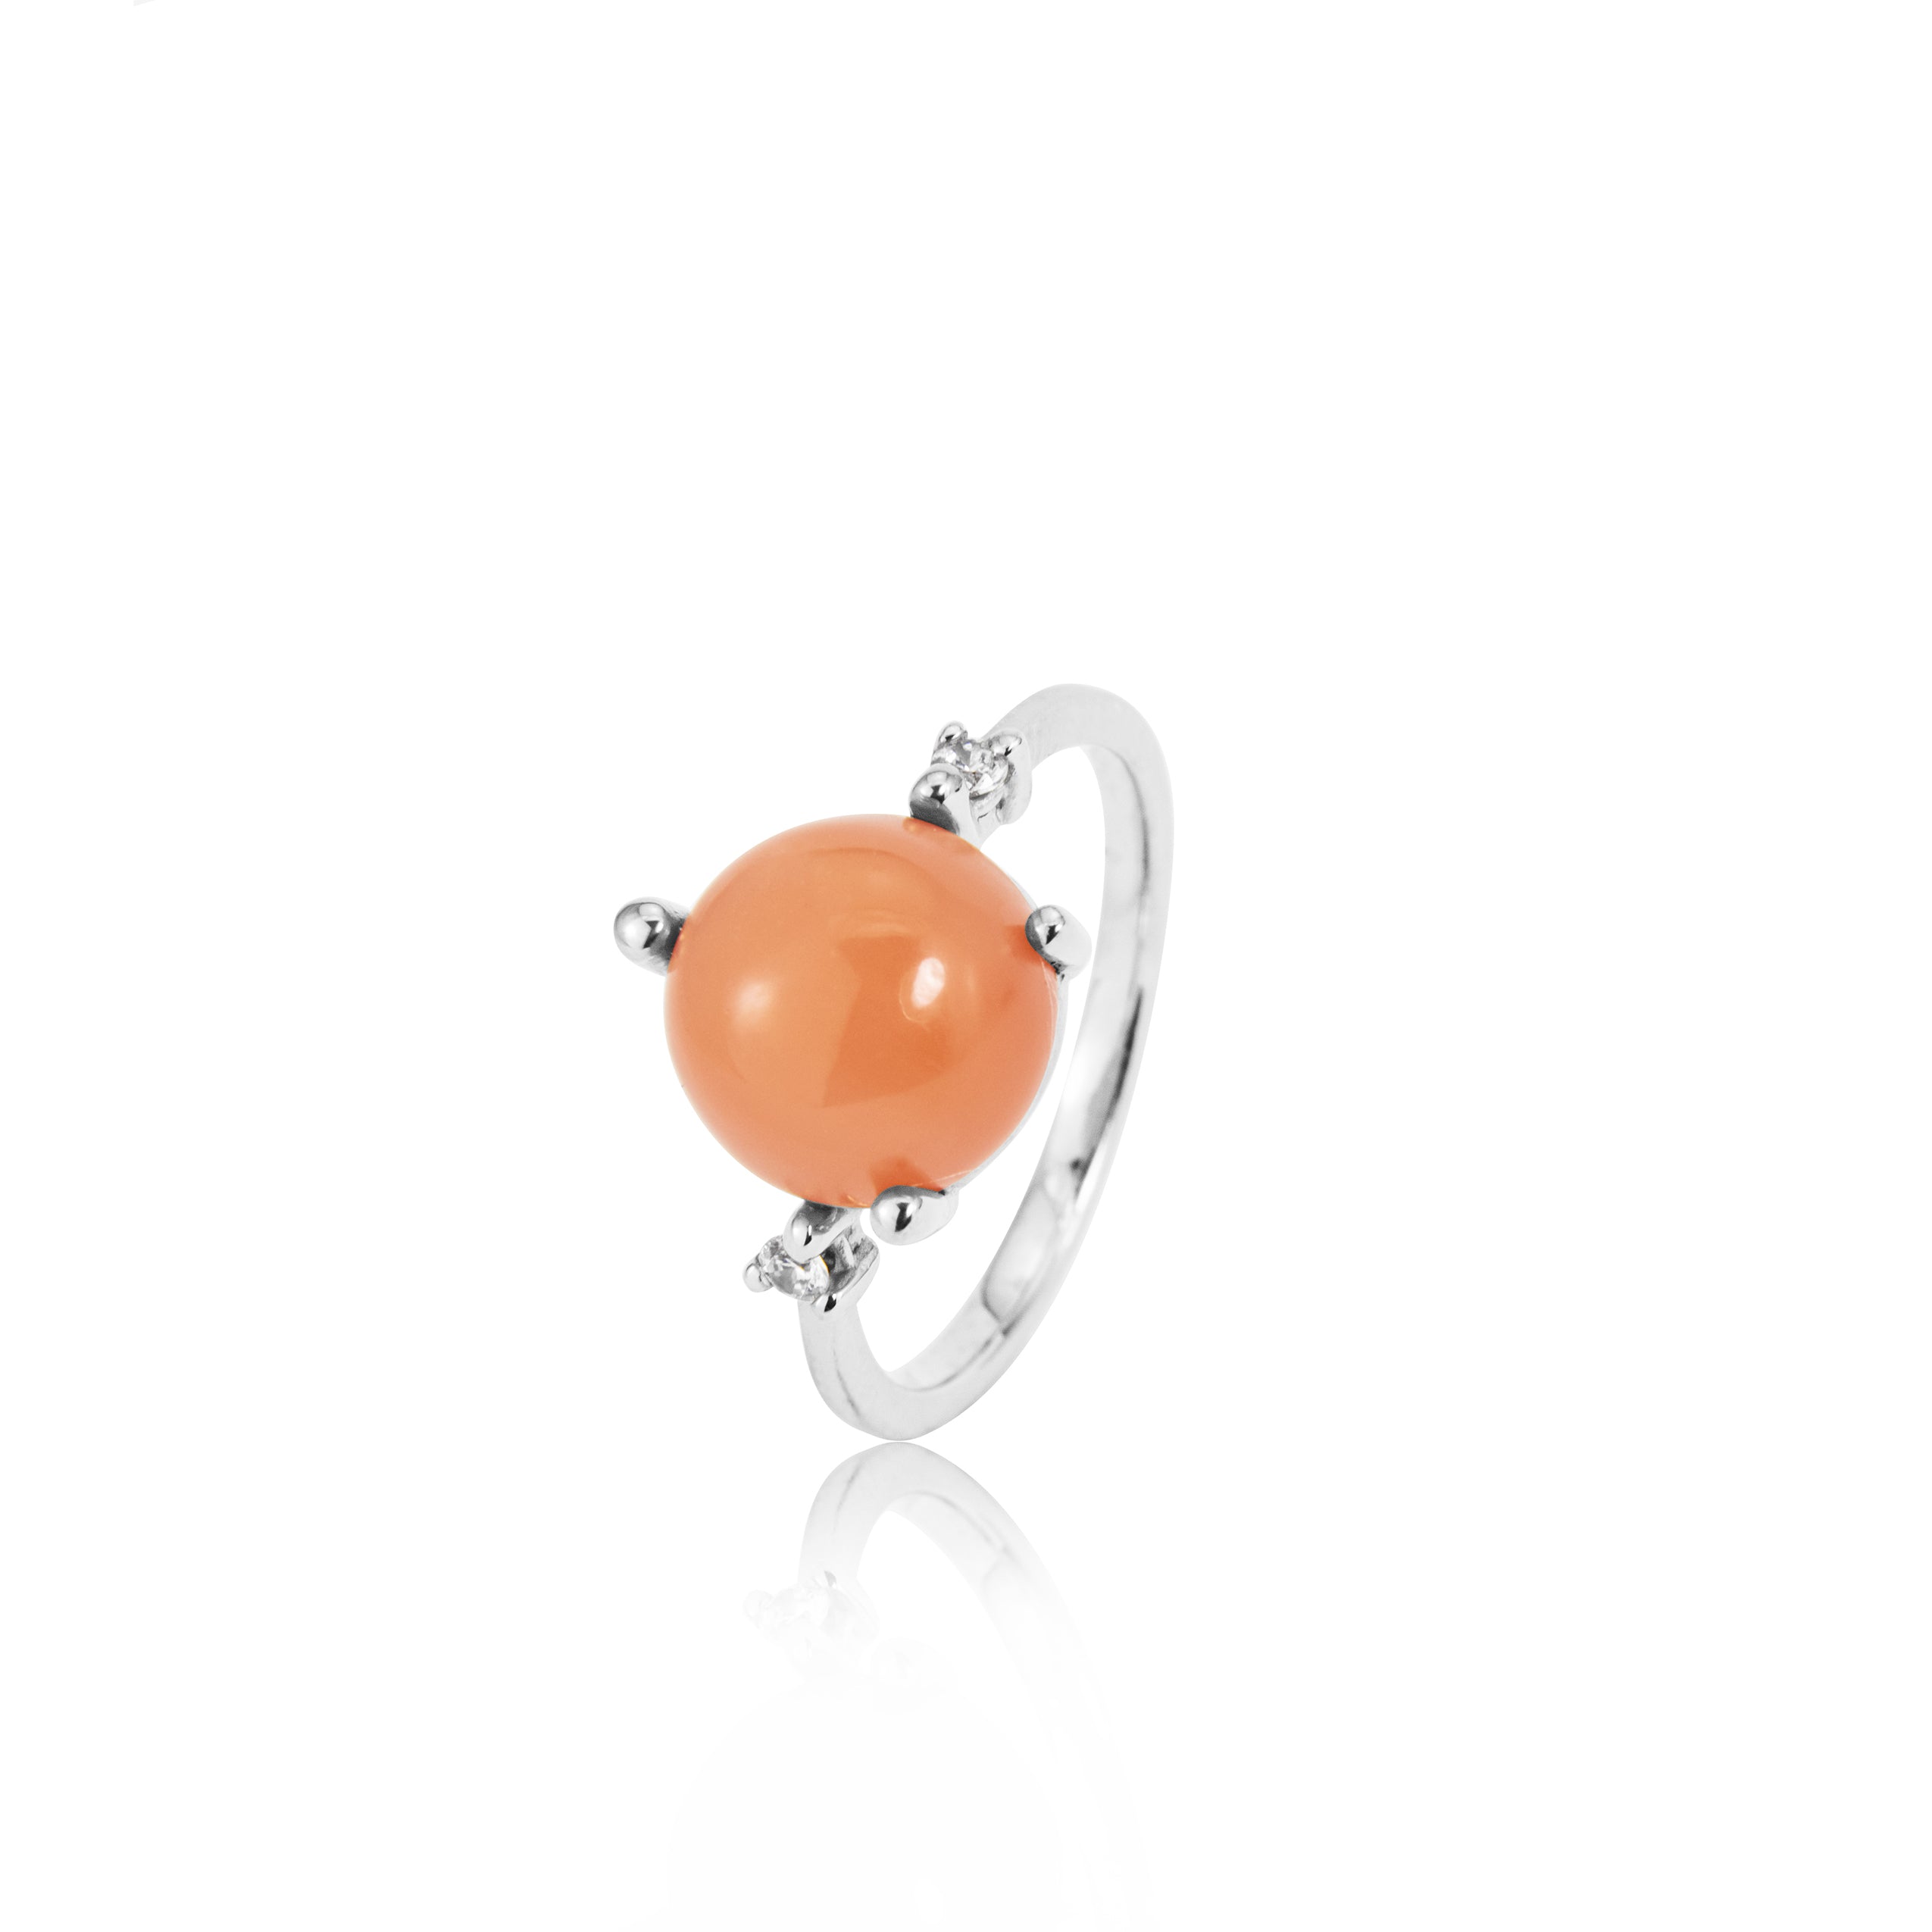 Stellini ring "big" in 585/- gold with moonstone peach